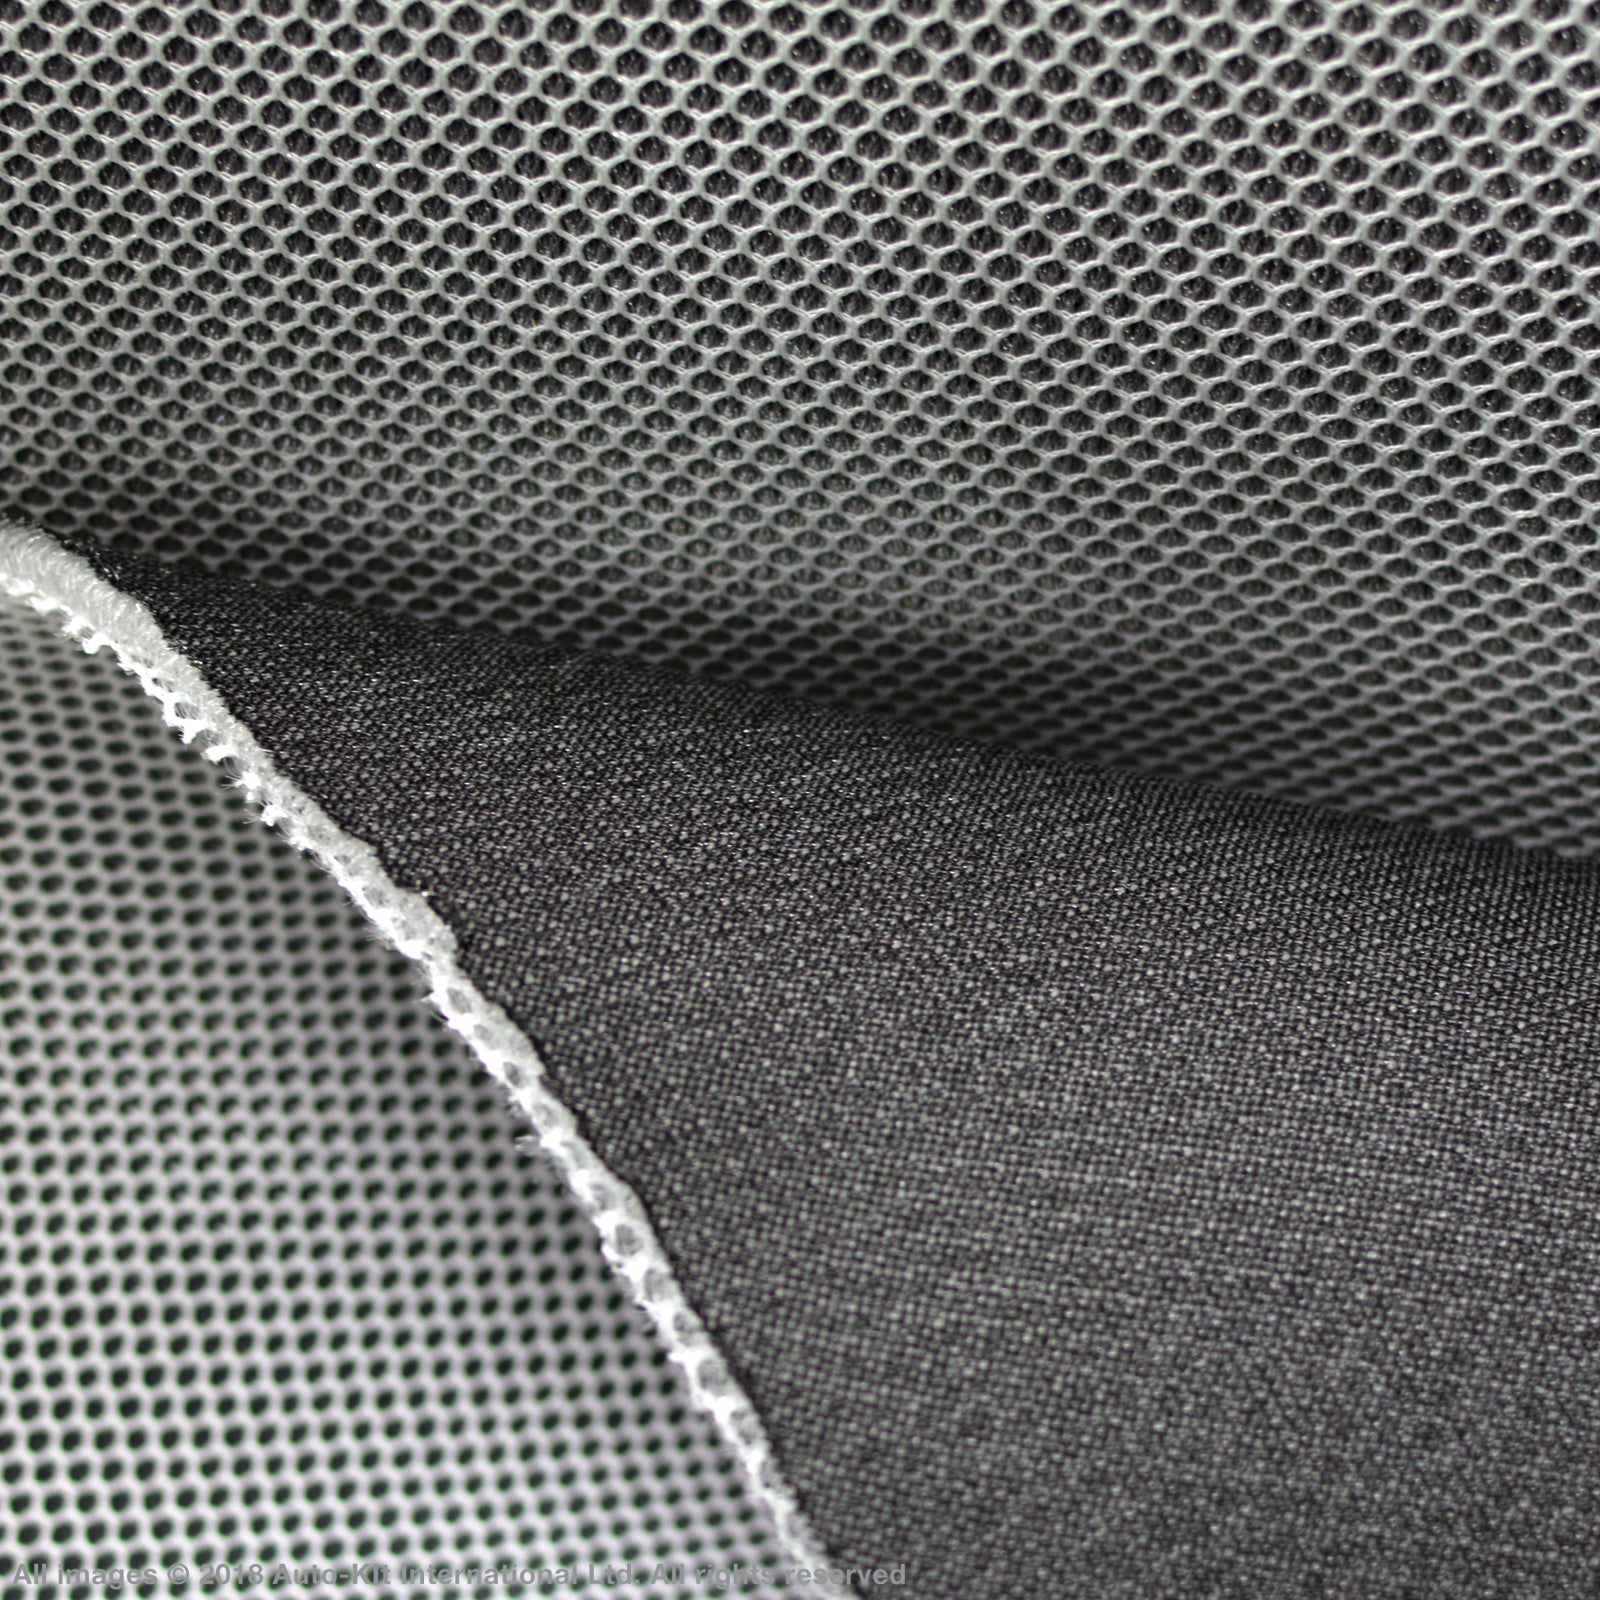 spacer mesh fabric - YUAN PEING APPLIED MATERIAL CO., LTD